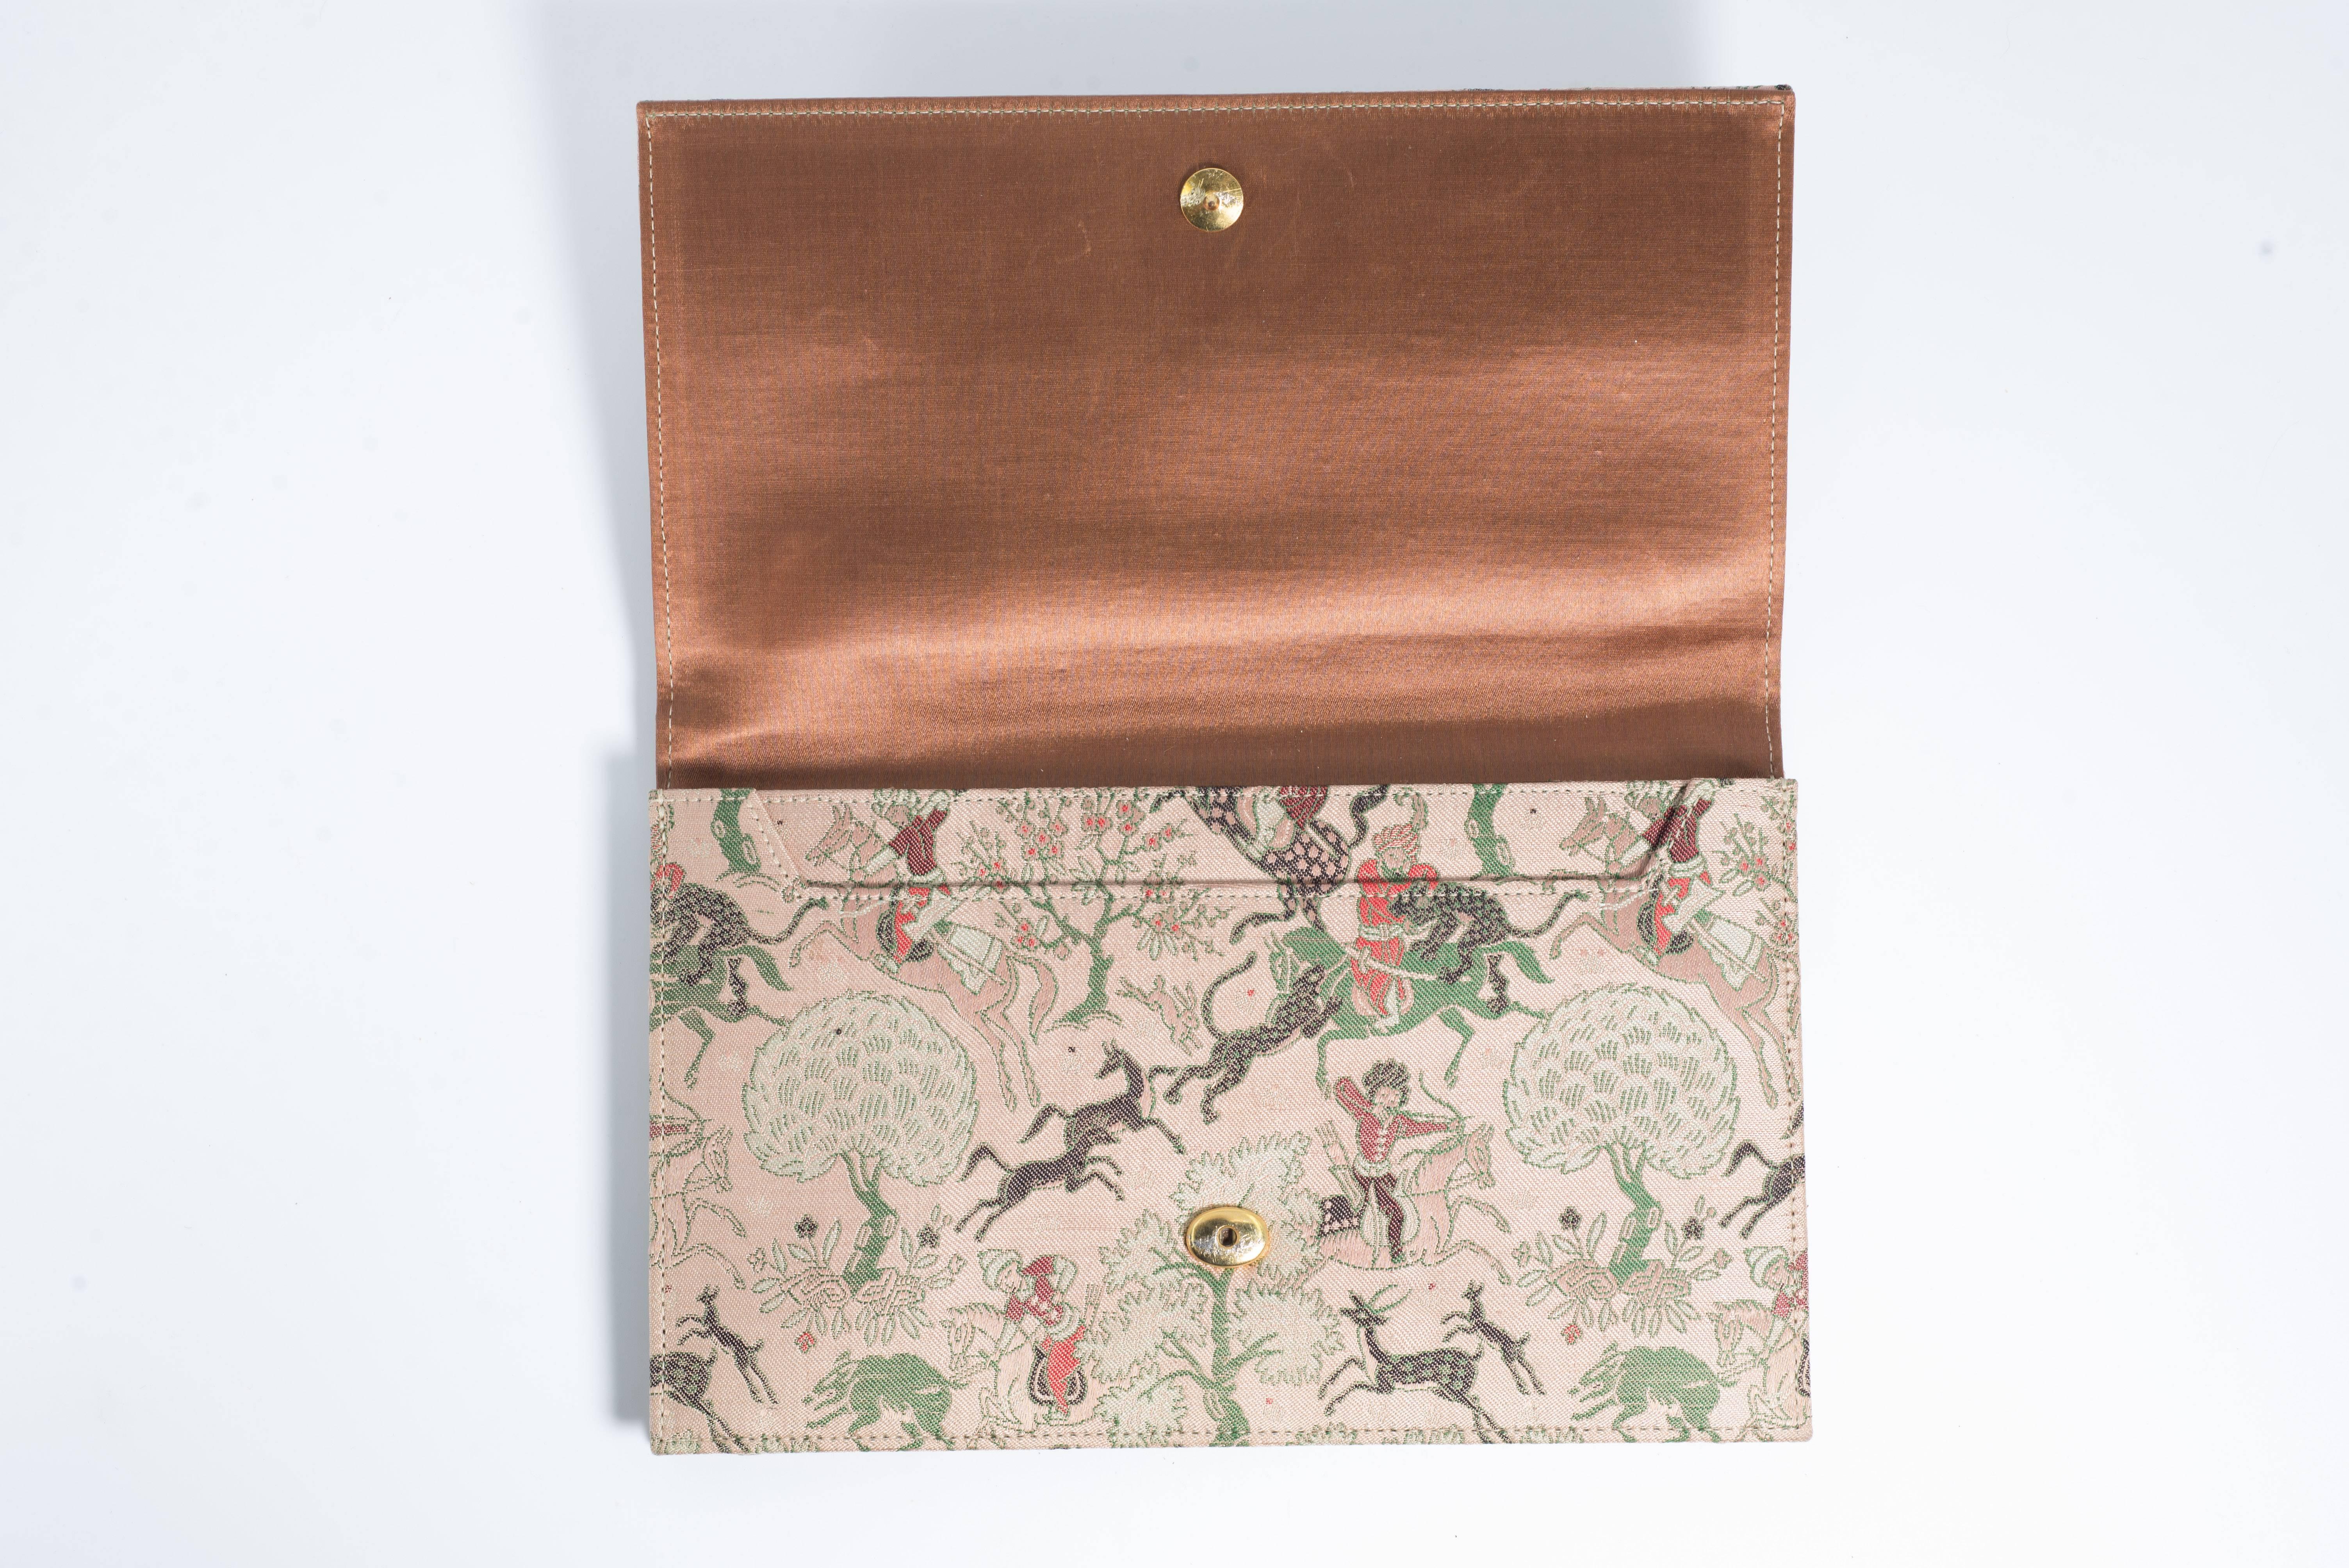 Mint condition vintage  Bianchini Ferrier silk Persian themed fabric for Cartier evening pochettes made by Clive Shilton who designed and made Princess Diana's bridal purse and shoes.

This are all offered here on 1stdibs for the first time. Made